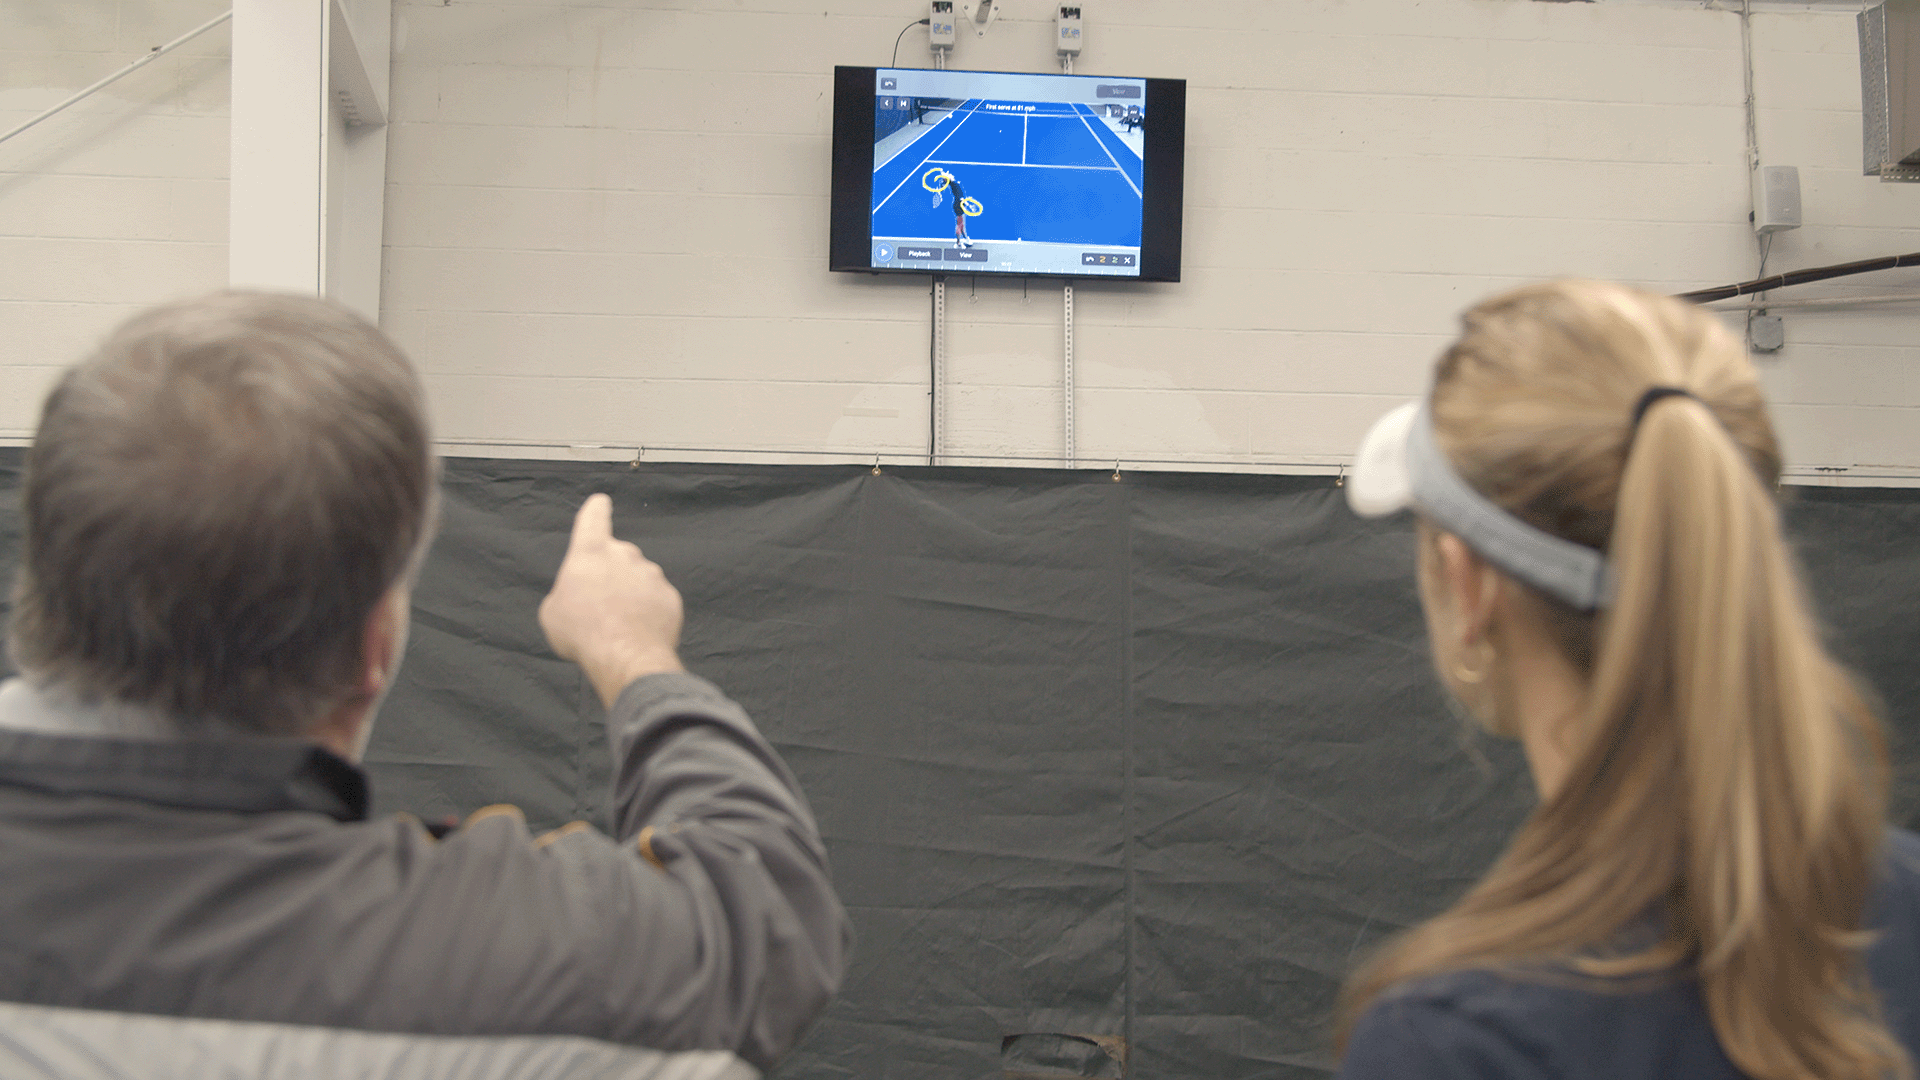 Tennis coach and player using on-court video tools during a lesson